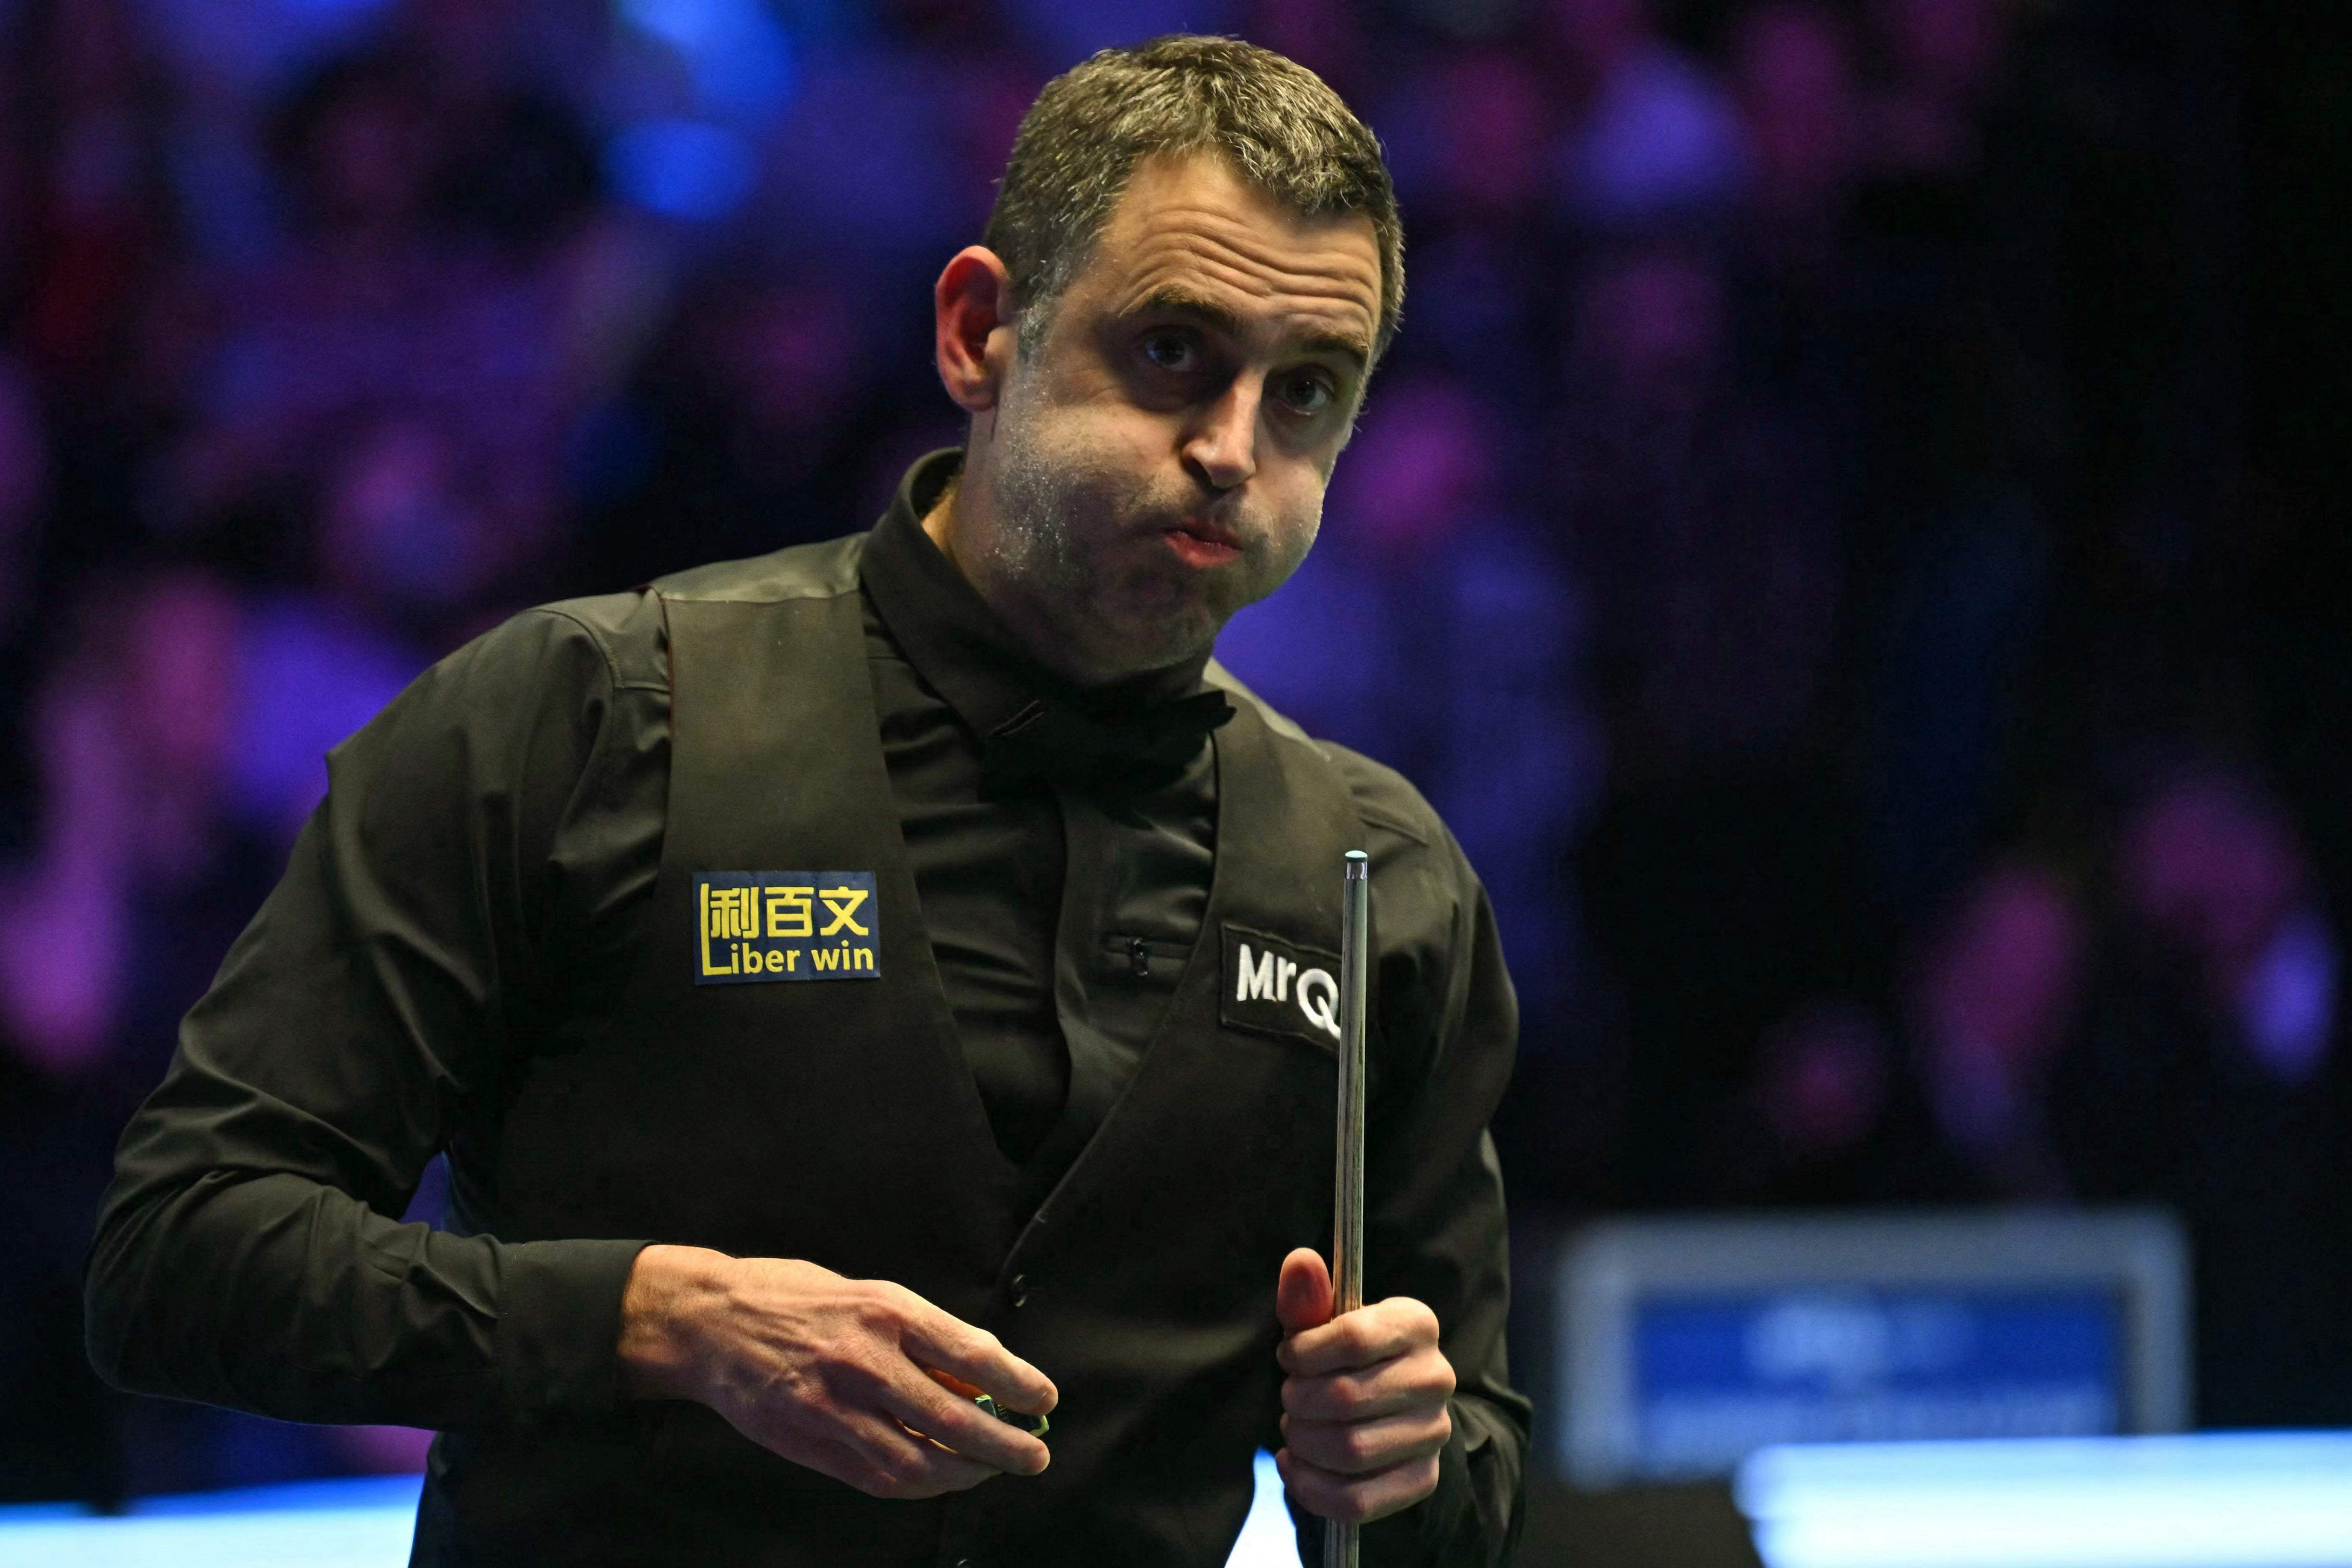 Ronnie O’Sullivan lost 6-0 to Mark Selby